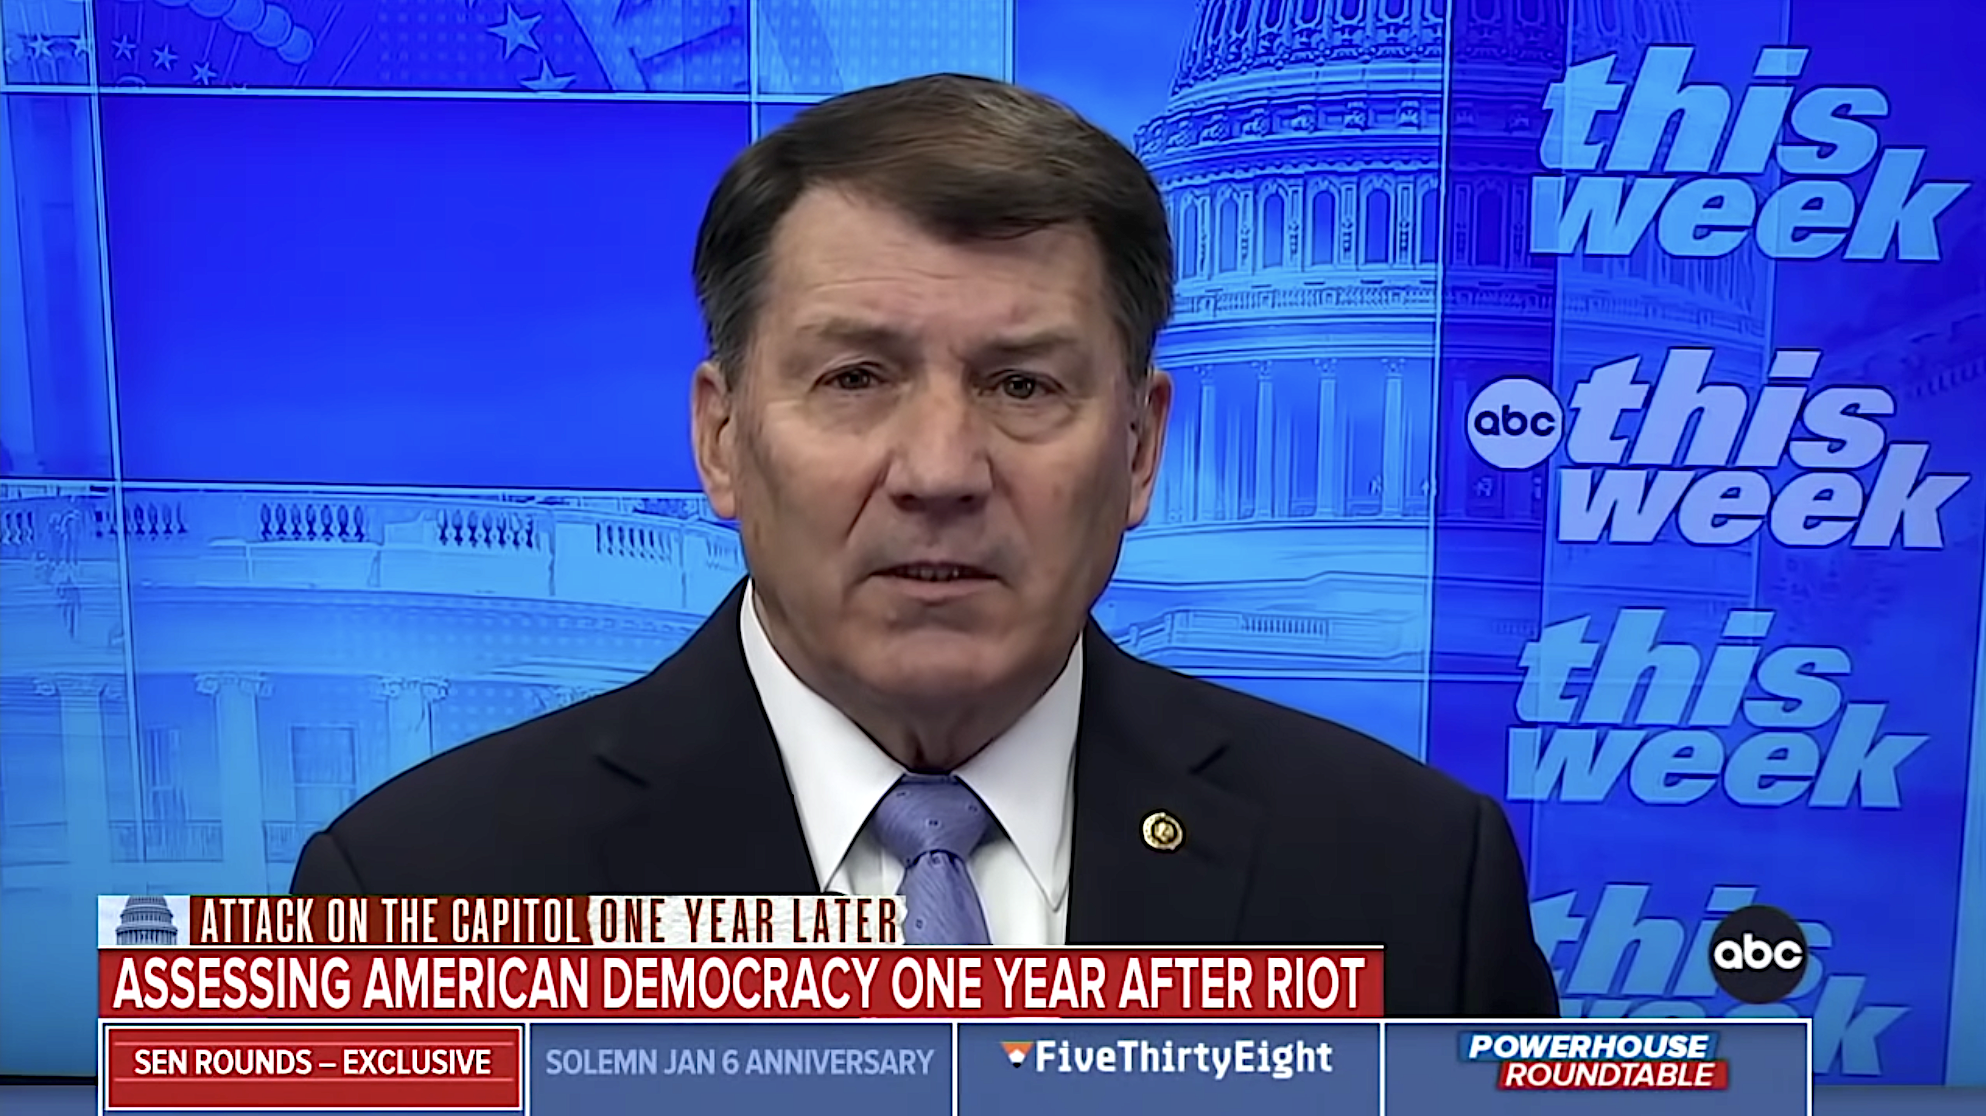 Sen. Mike Rounds